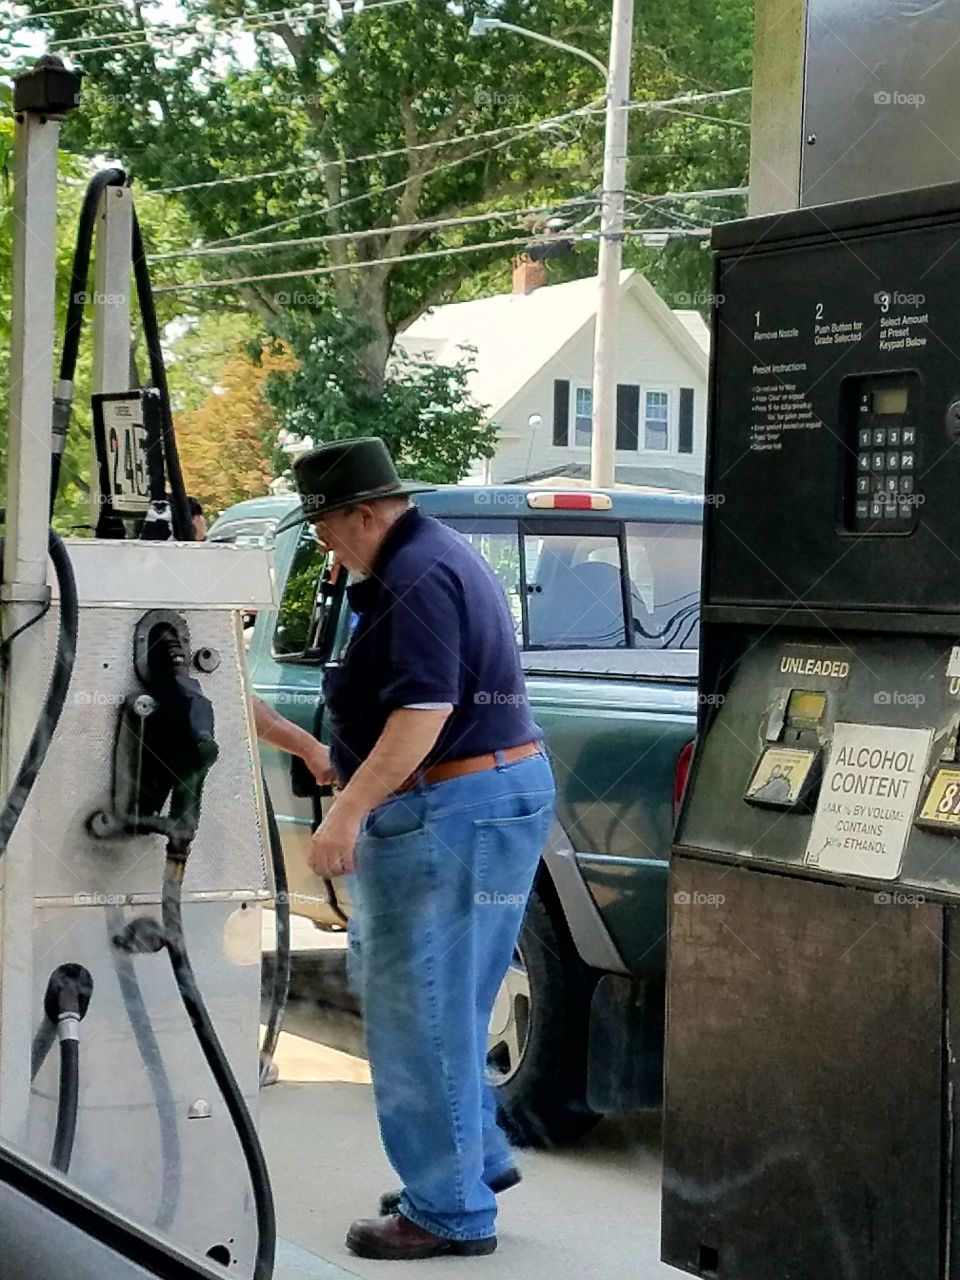 Gas station, man filling his truck.